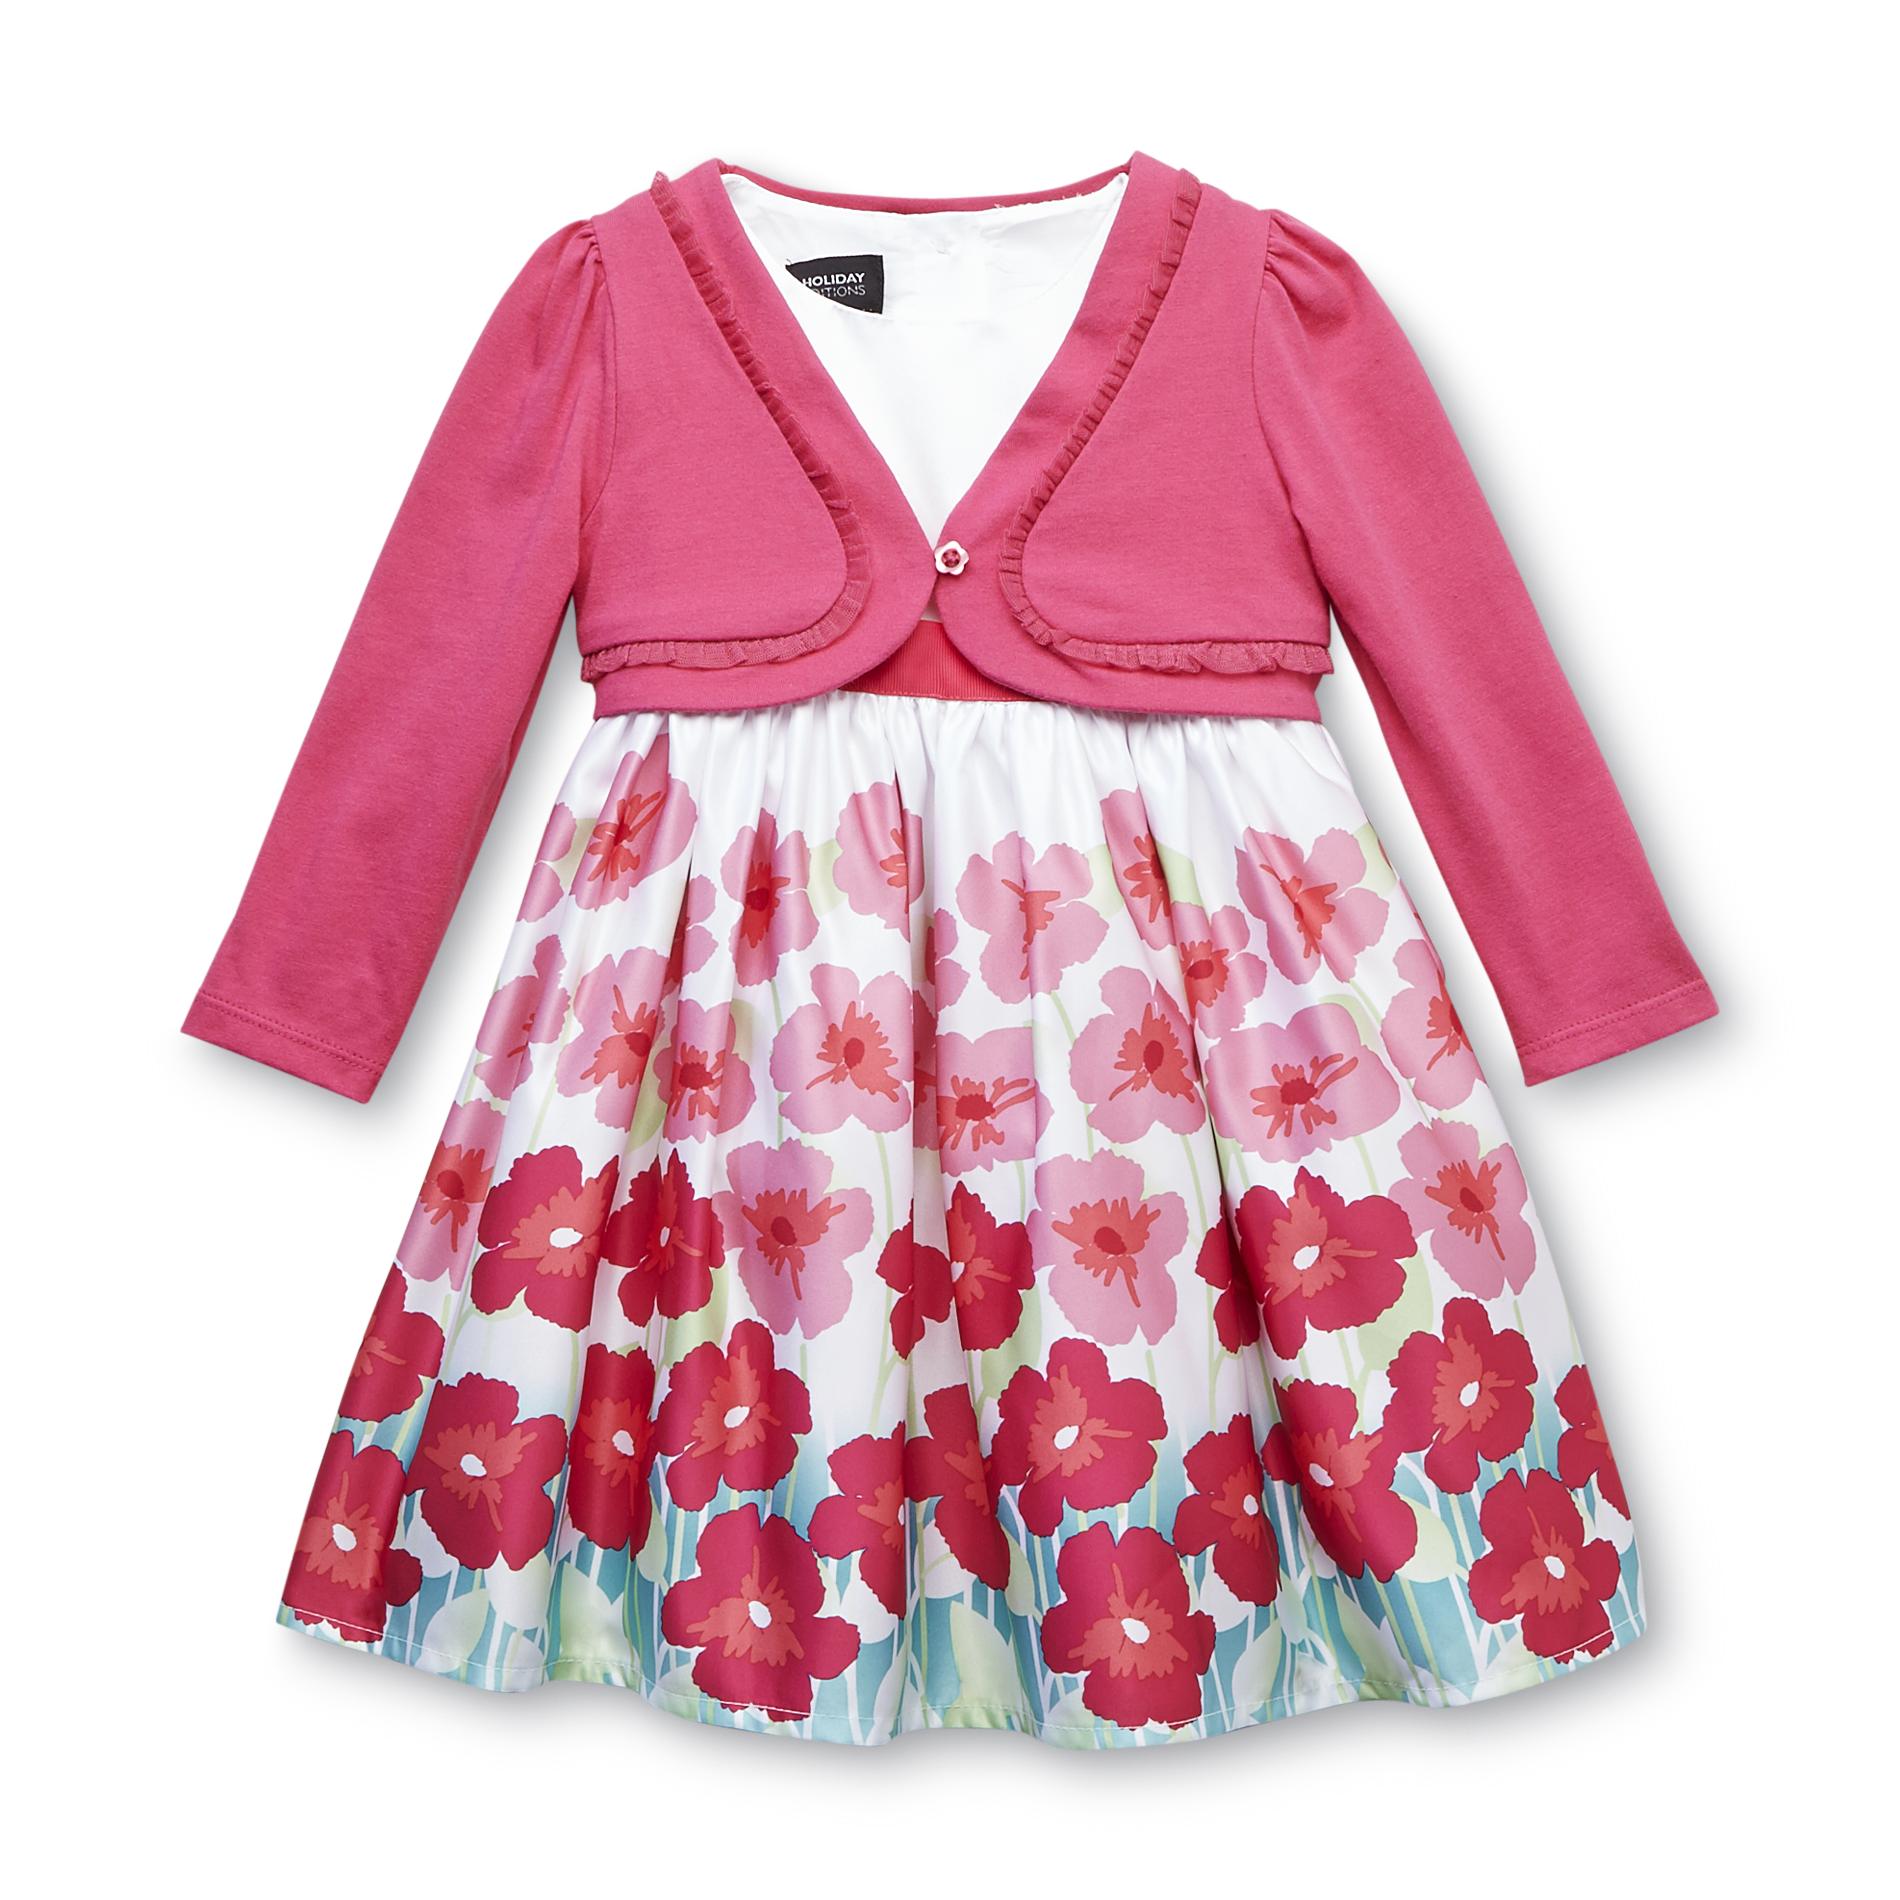 Holiday Editions Infant & Toddler Girl's Party Dress & Shrug - Floral